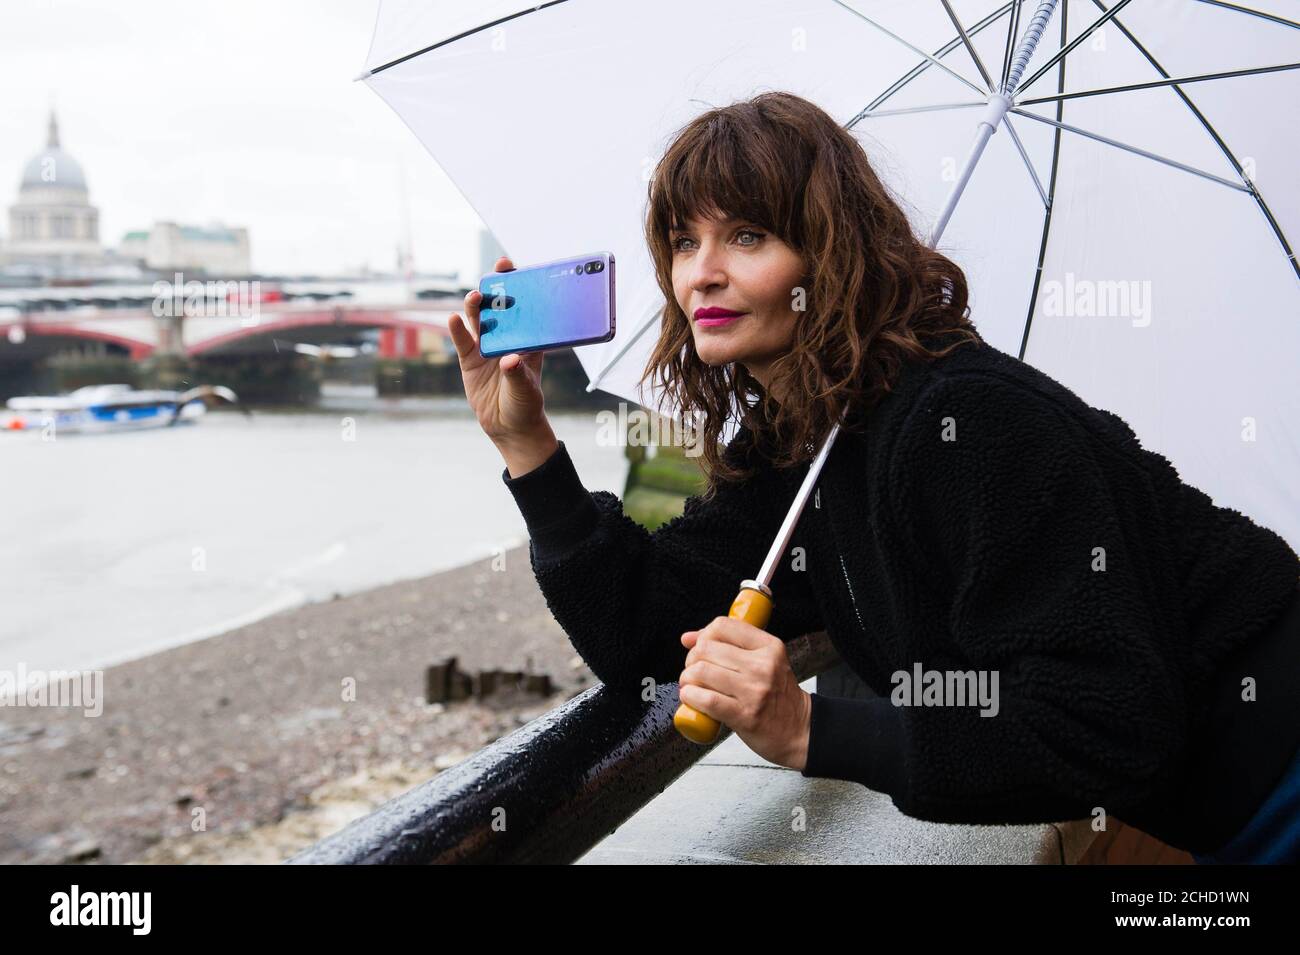 EDITORIAL USE ONLY Helena Christensen is photographed by competition winners at a Huawei P20 Pro photography masterclass, at OXO Tower Brasserie in London. Stock Photo